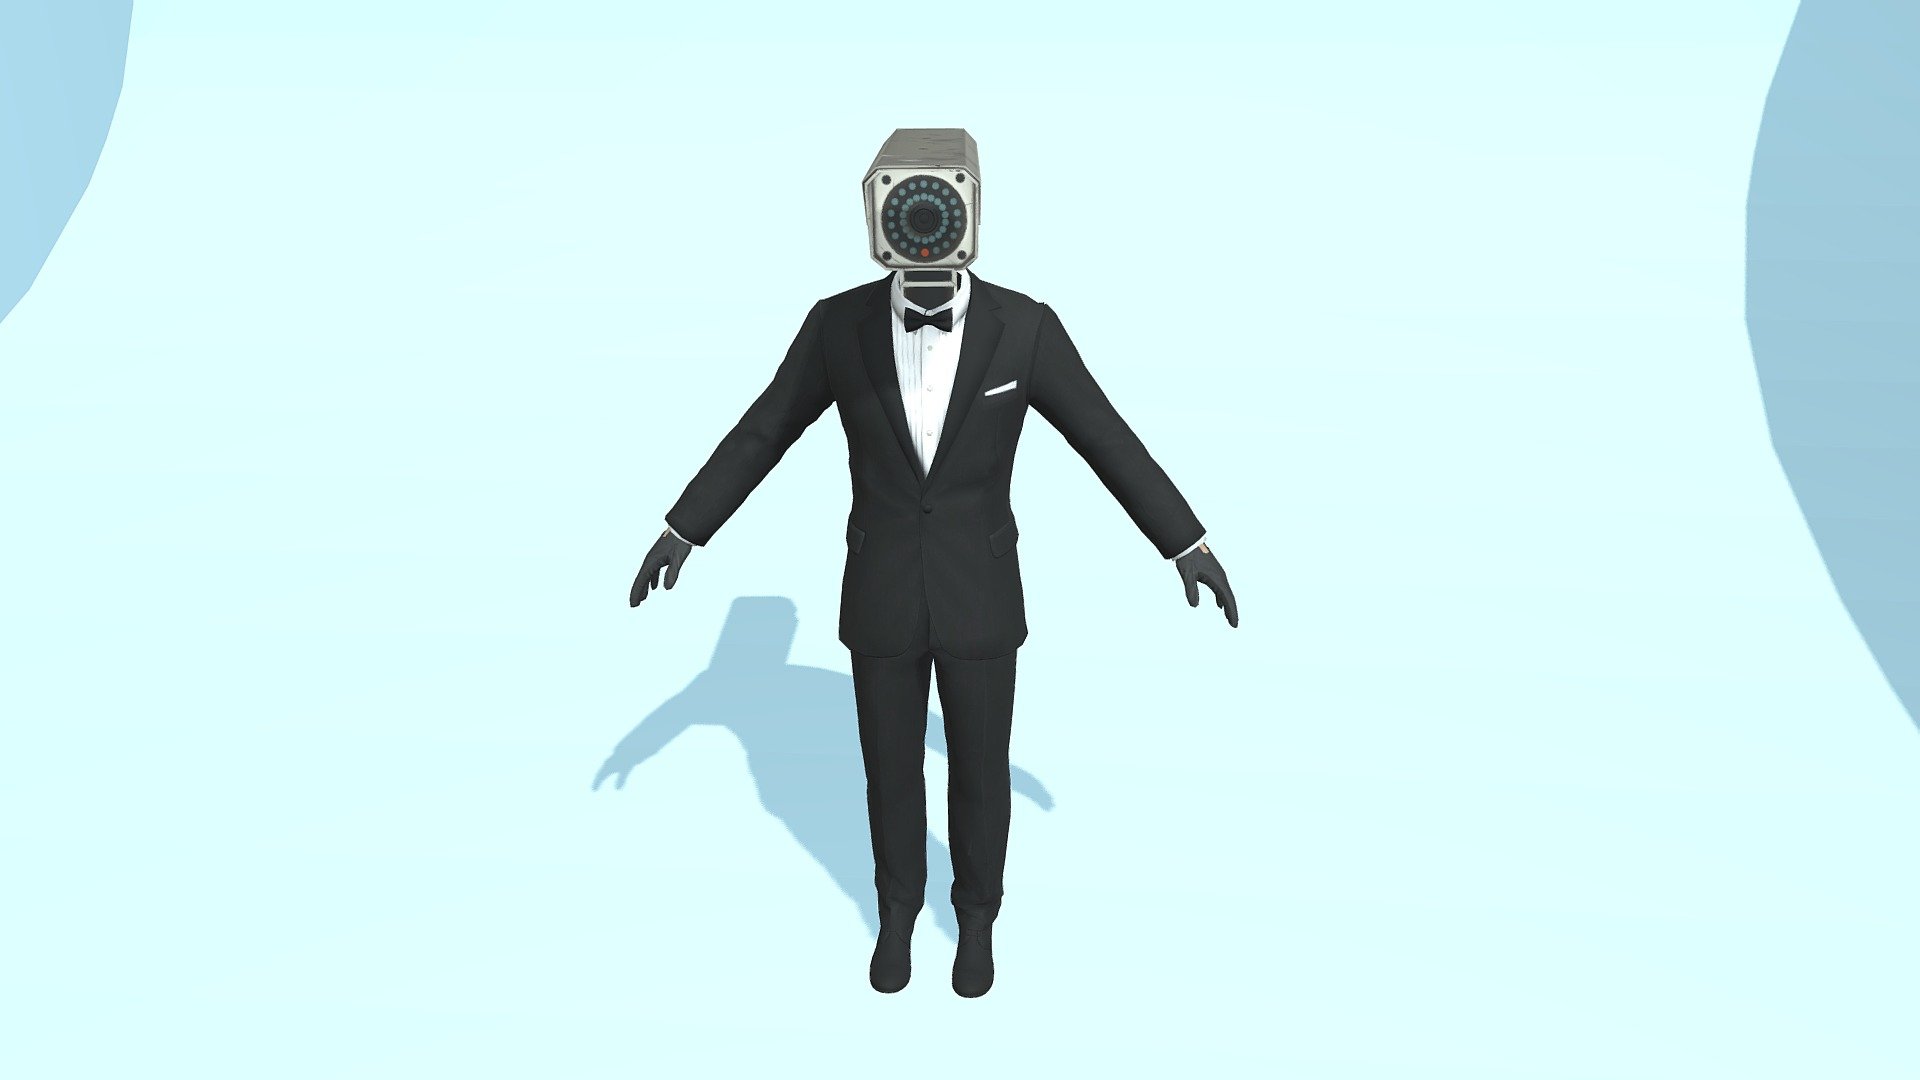 camera man from skibidi toilet videos, it's fully rigged and ready to animate.
follow for more characters from youtube.
DM me if you want it.
Go to cgtrades and you will find the model to download it.
enjoy 3d model